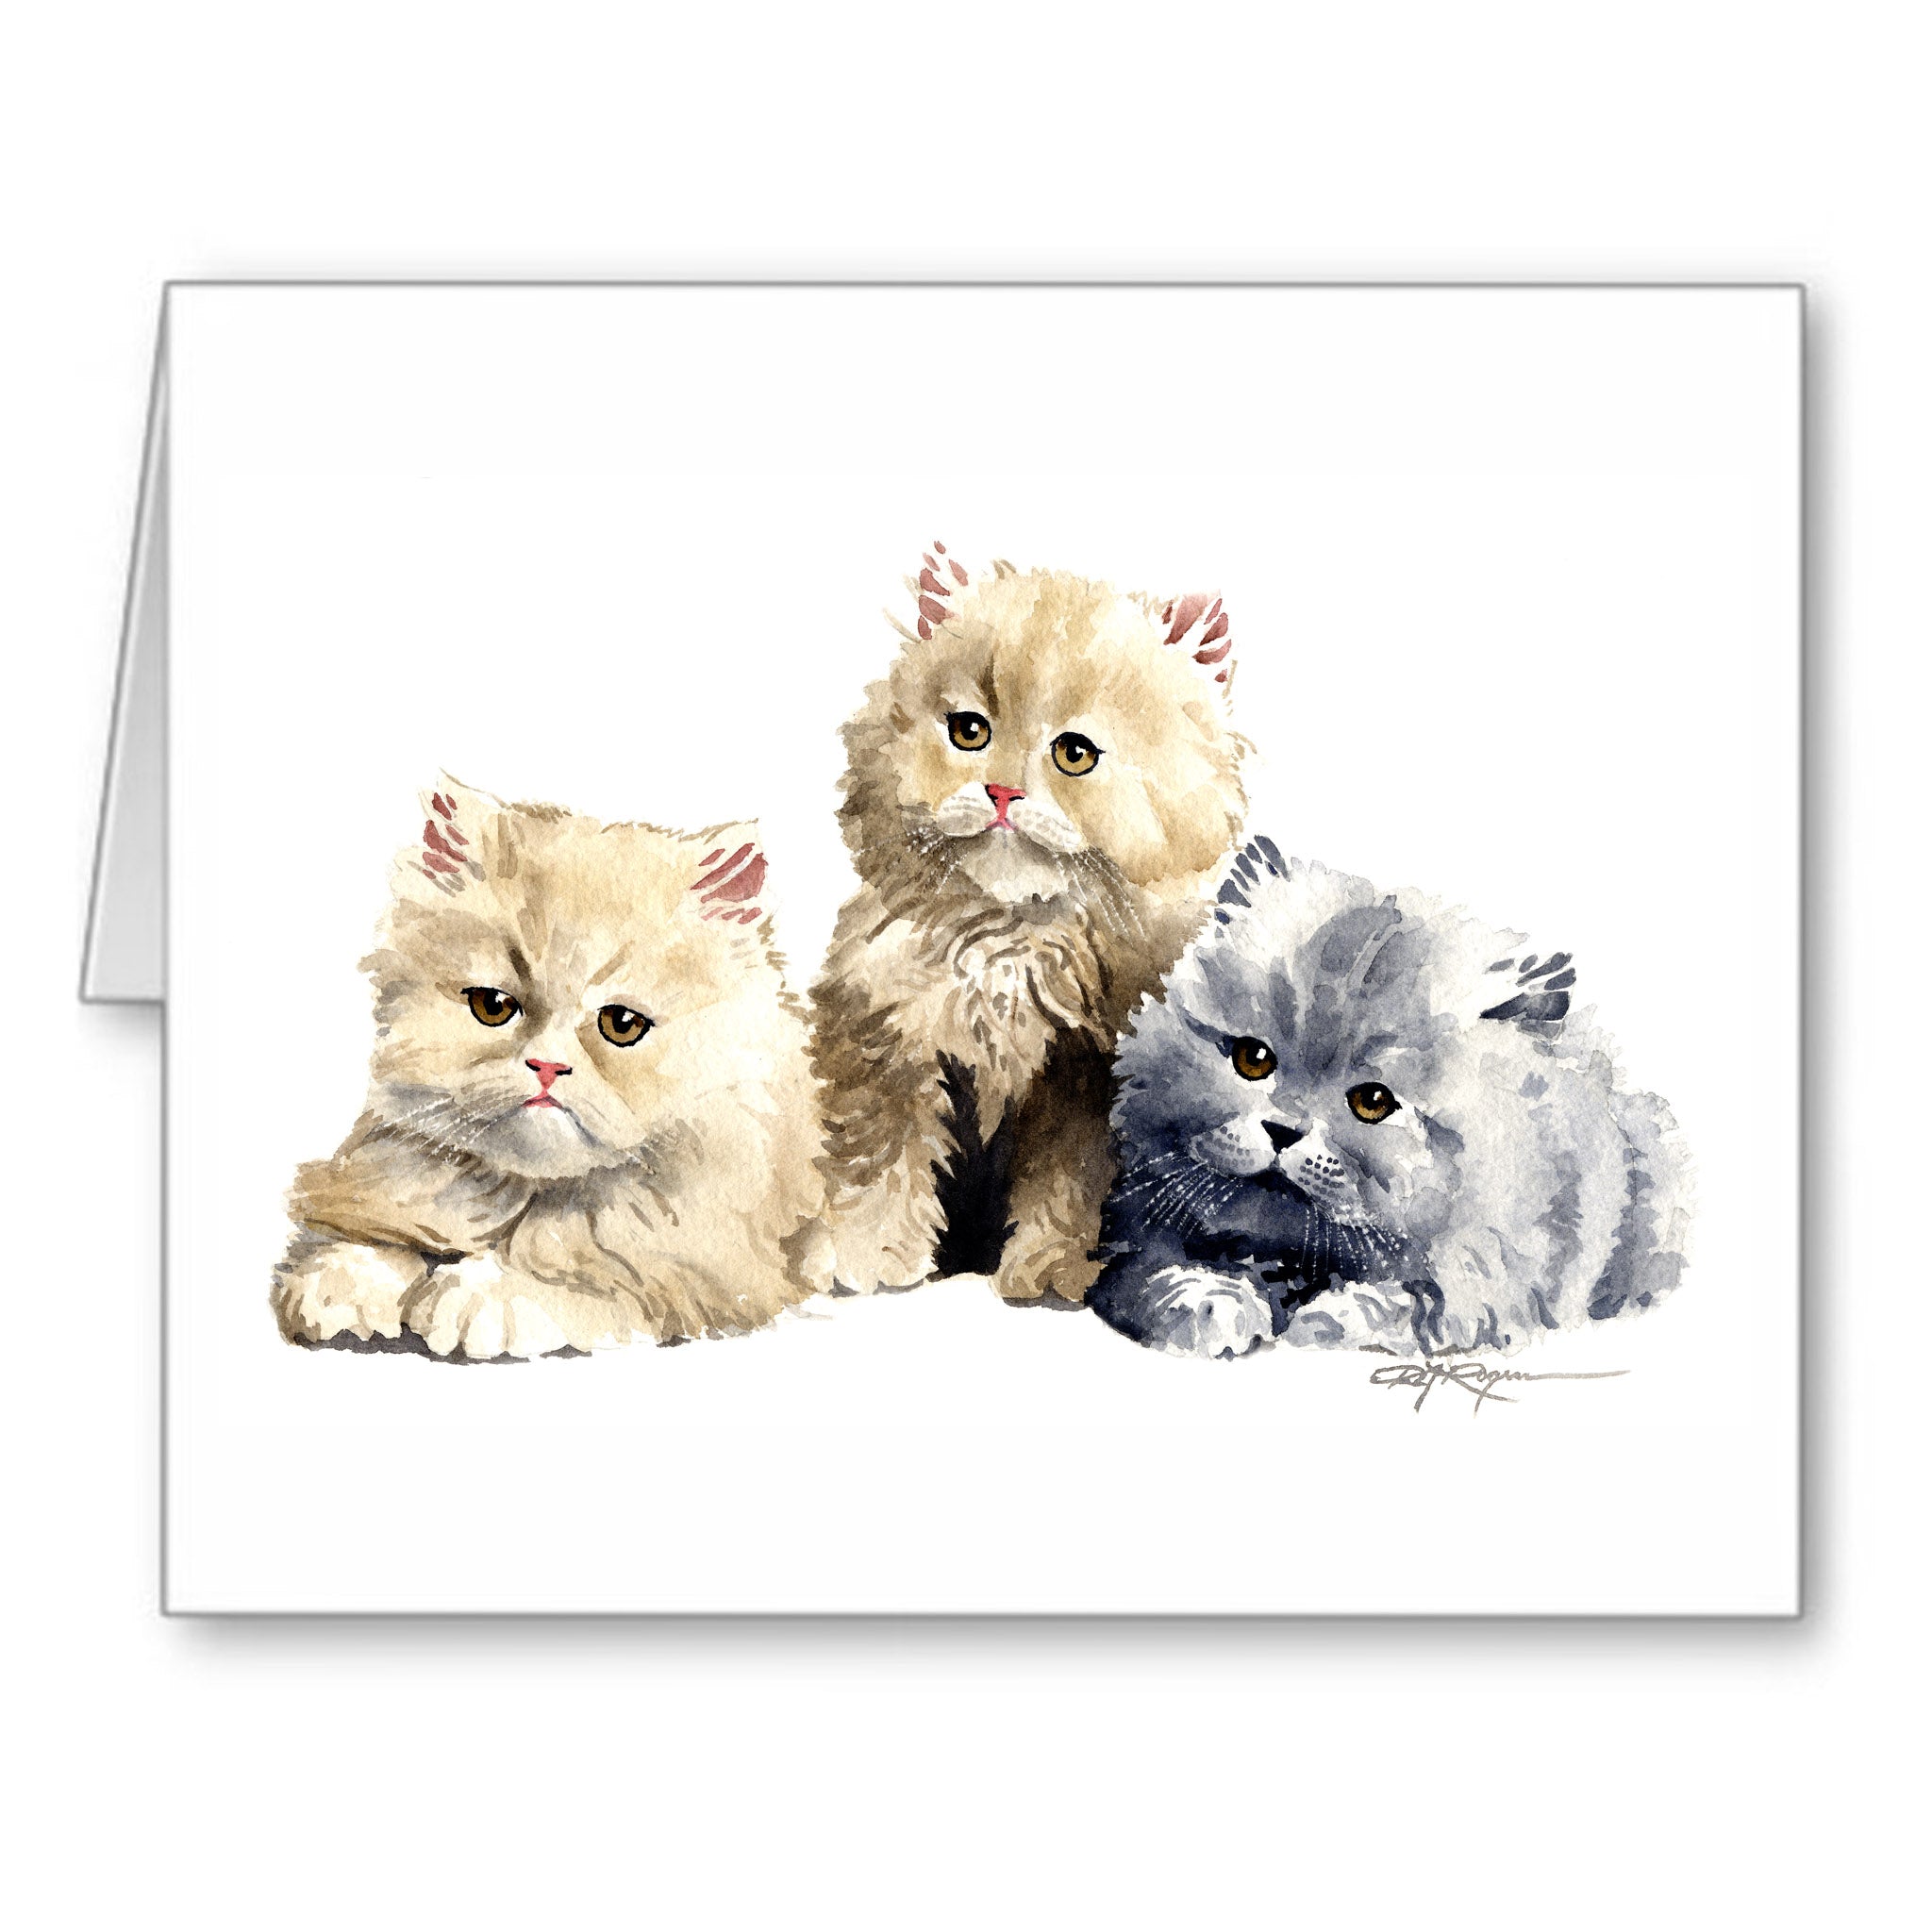 Kittens Cat Traditional Watercolor Note Card Art by Artist DJ Rogers